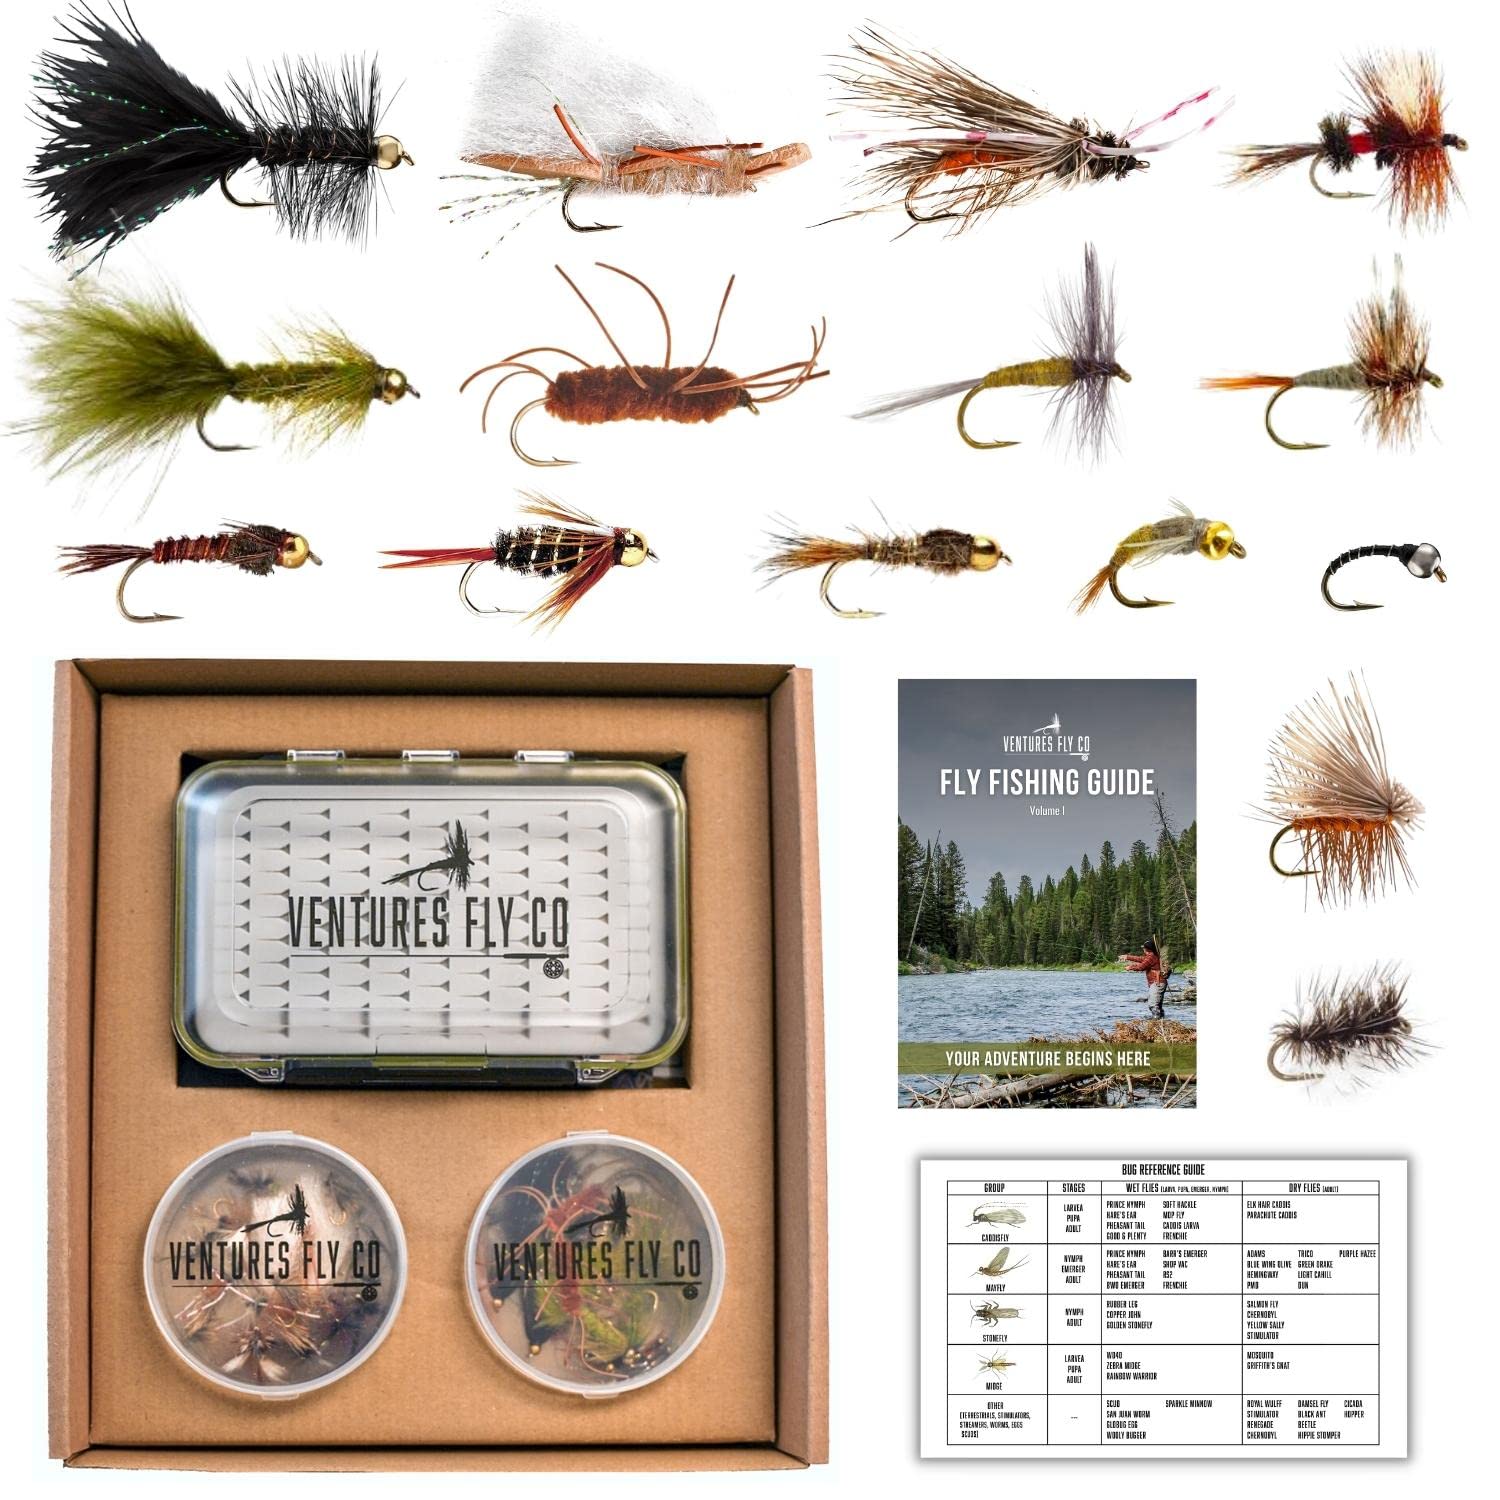 Nebublu Trout Bass Fly Fishing Flies Kit - 100pcs Dry Flies Assortment with Fly Box for Angling, Size: 12.5